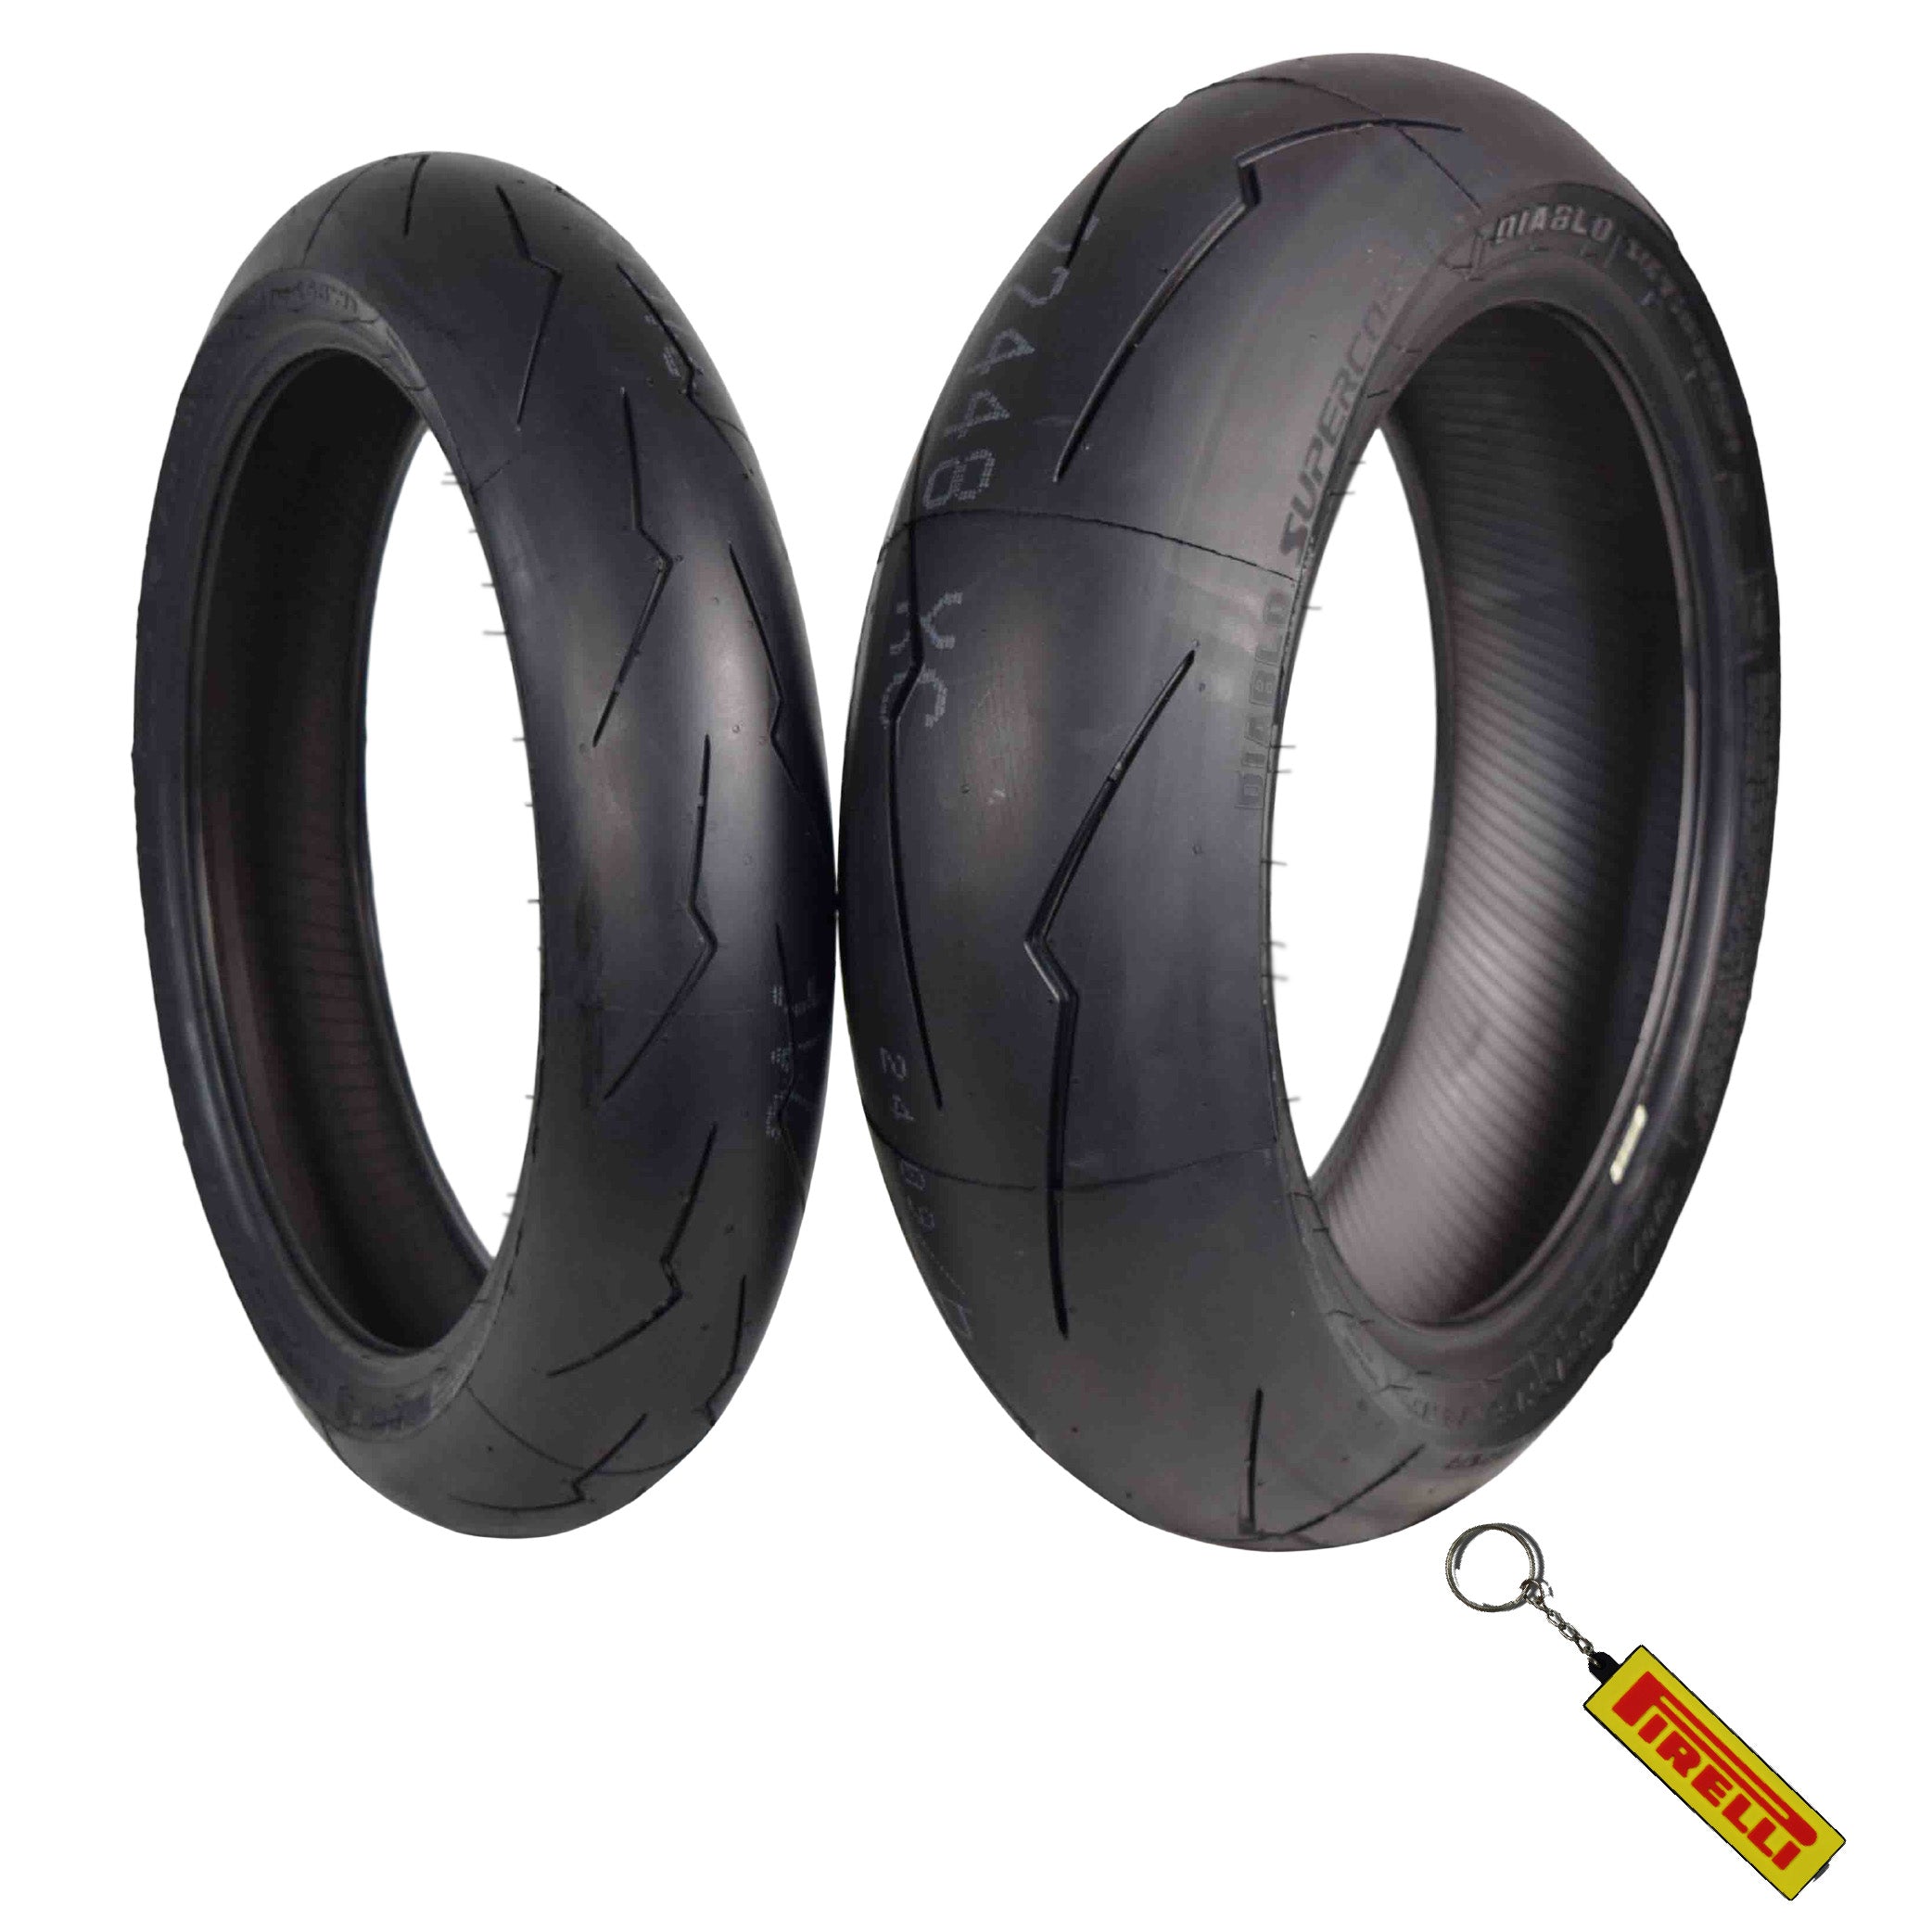 PIRELLI-TIRES-Front-120-70ZR17-Rear-180-55ZR17-SUPER-CORSA-V2-Motorcycle-Tires-image-1